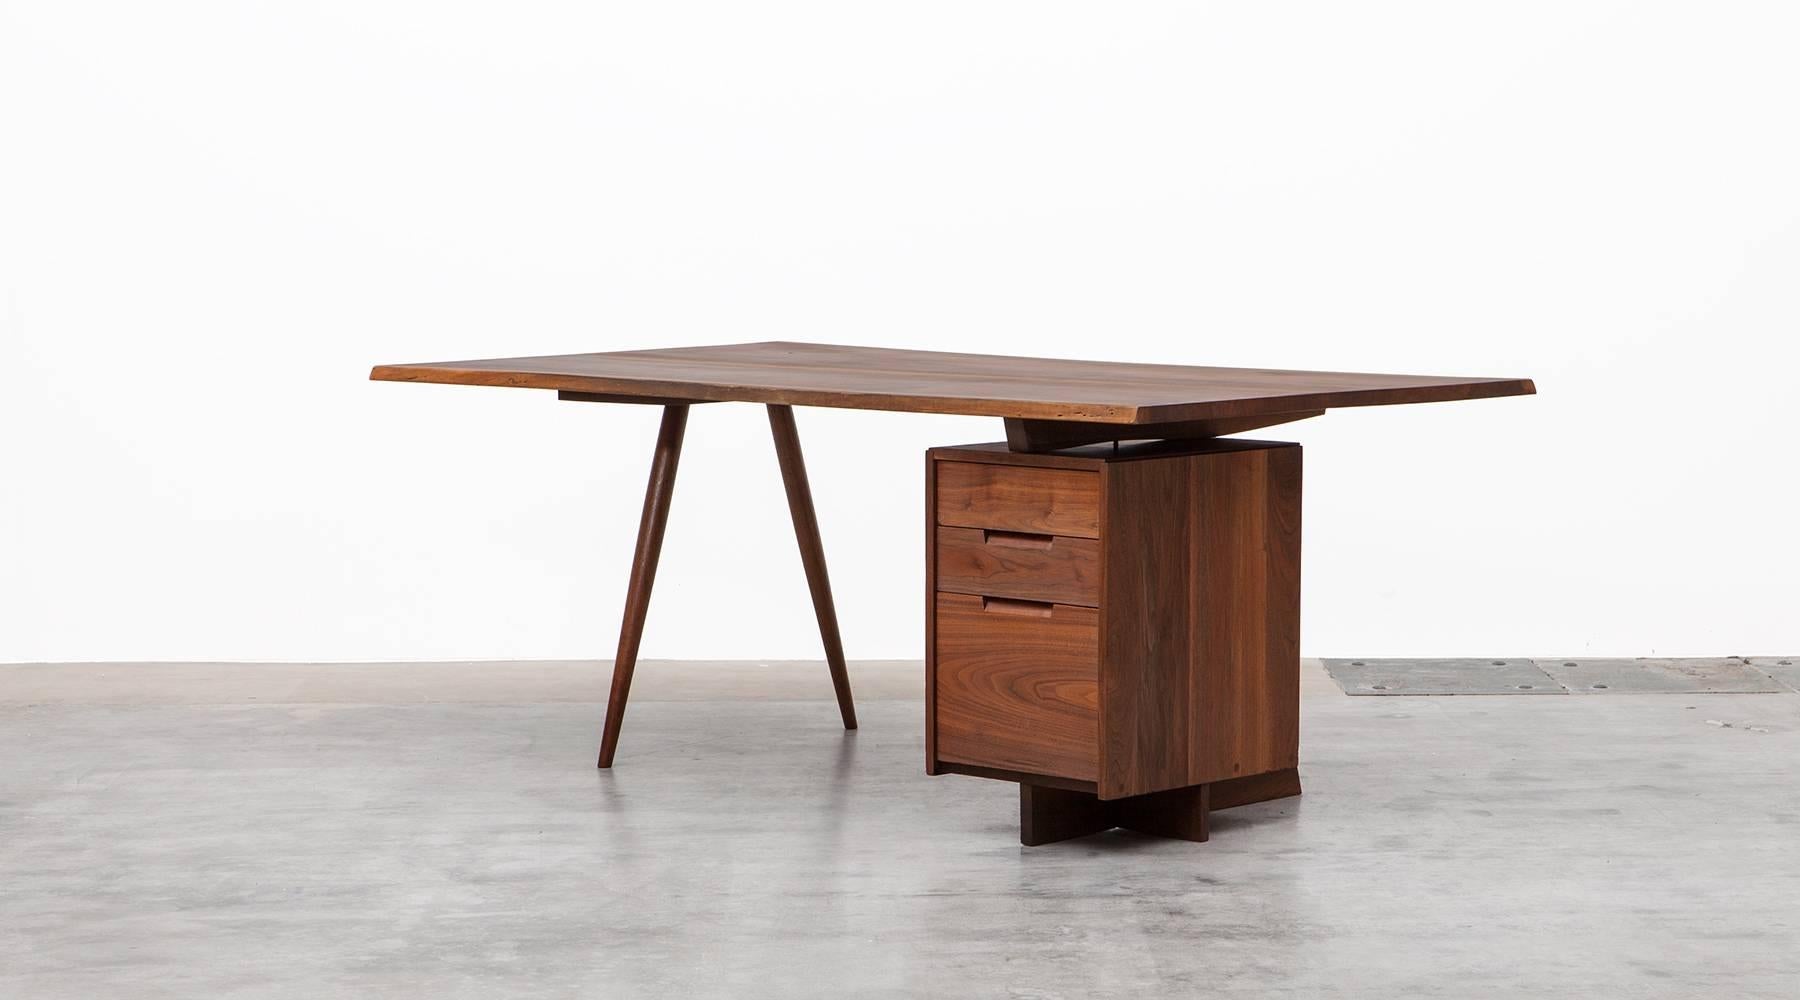 This Classic desk by George Nakashima has a beautifully figured American black walnut slab top with an organic and subtle free-form edge. On one side, its features storage cases with one large and two small drawers and on the other two elegant